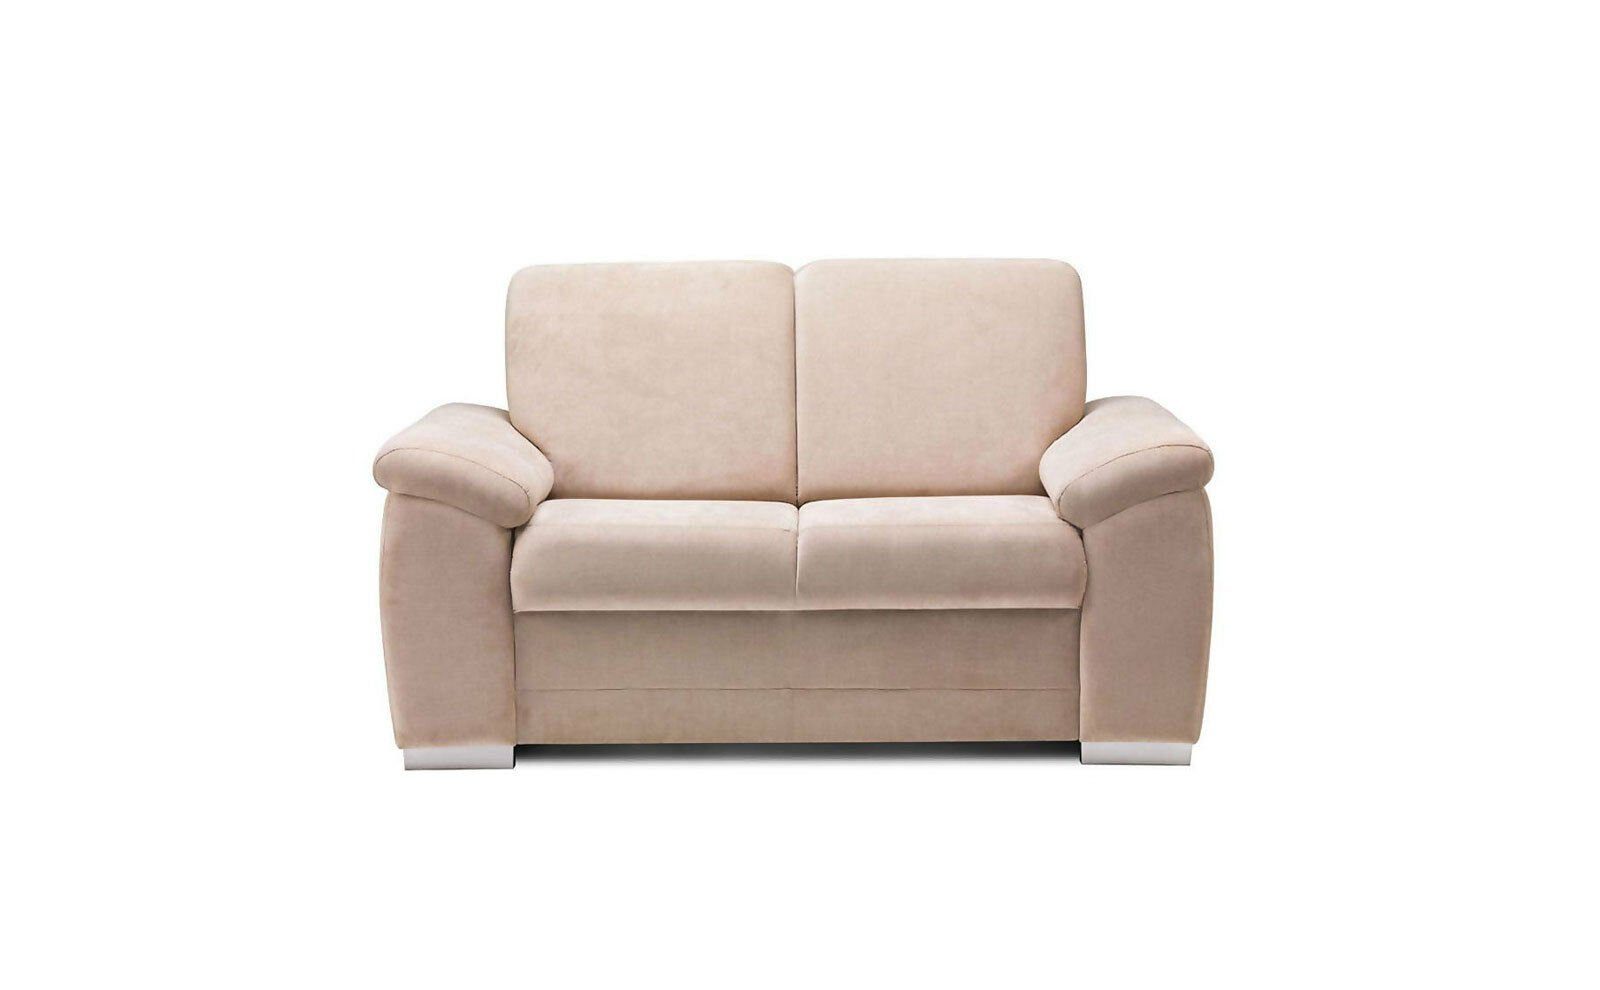 Design Relax Couch JVmoebel Sitzer Polster Lounge Sofa, Club Sofa Sofas 2 Textil